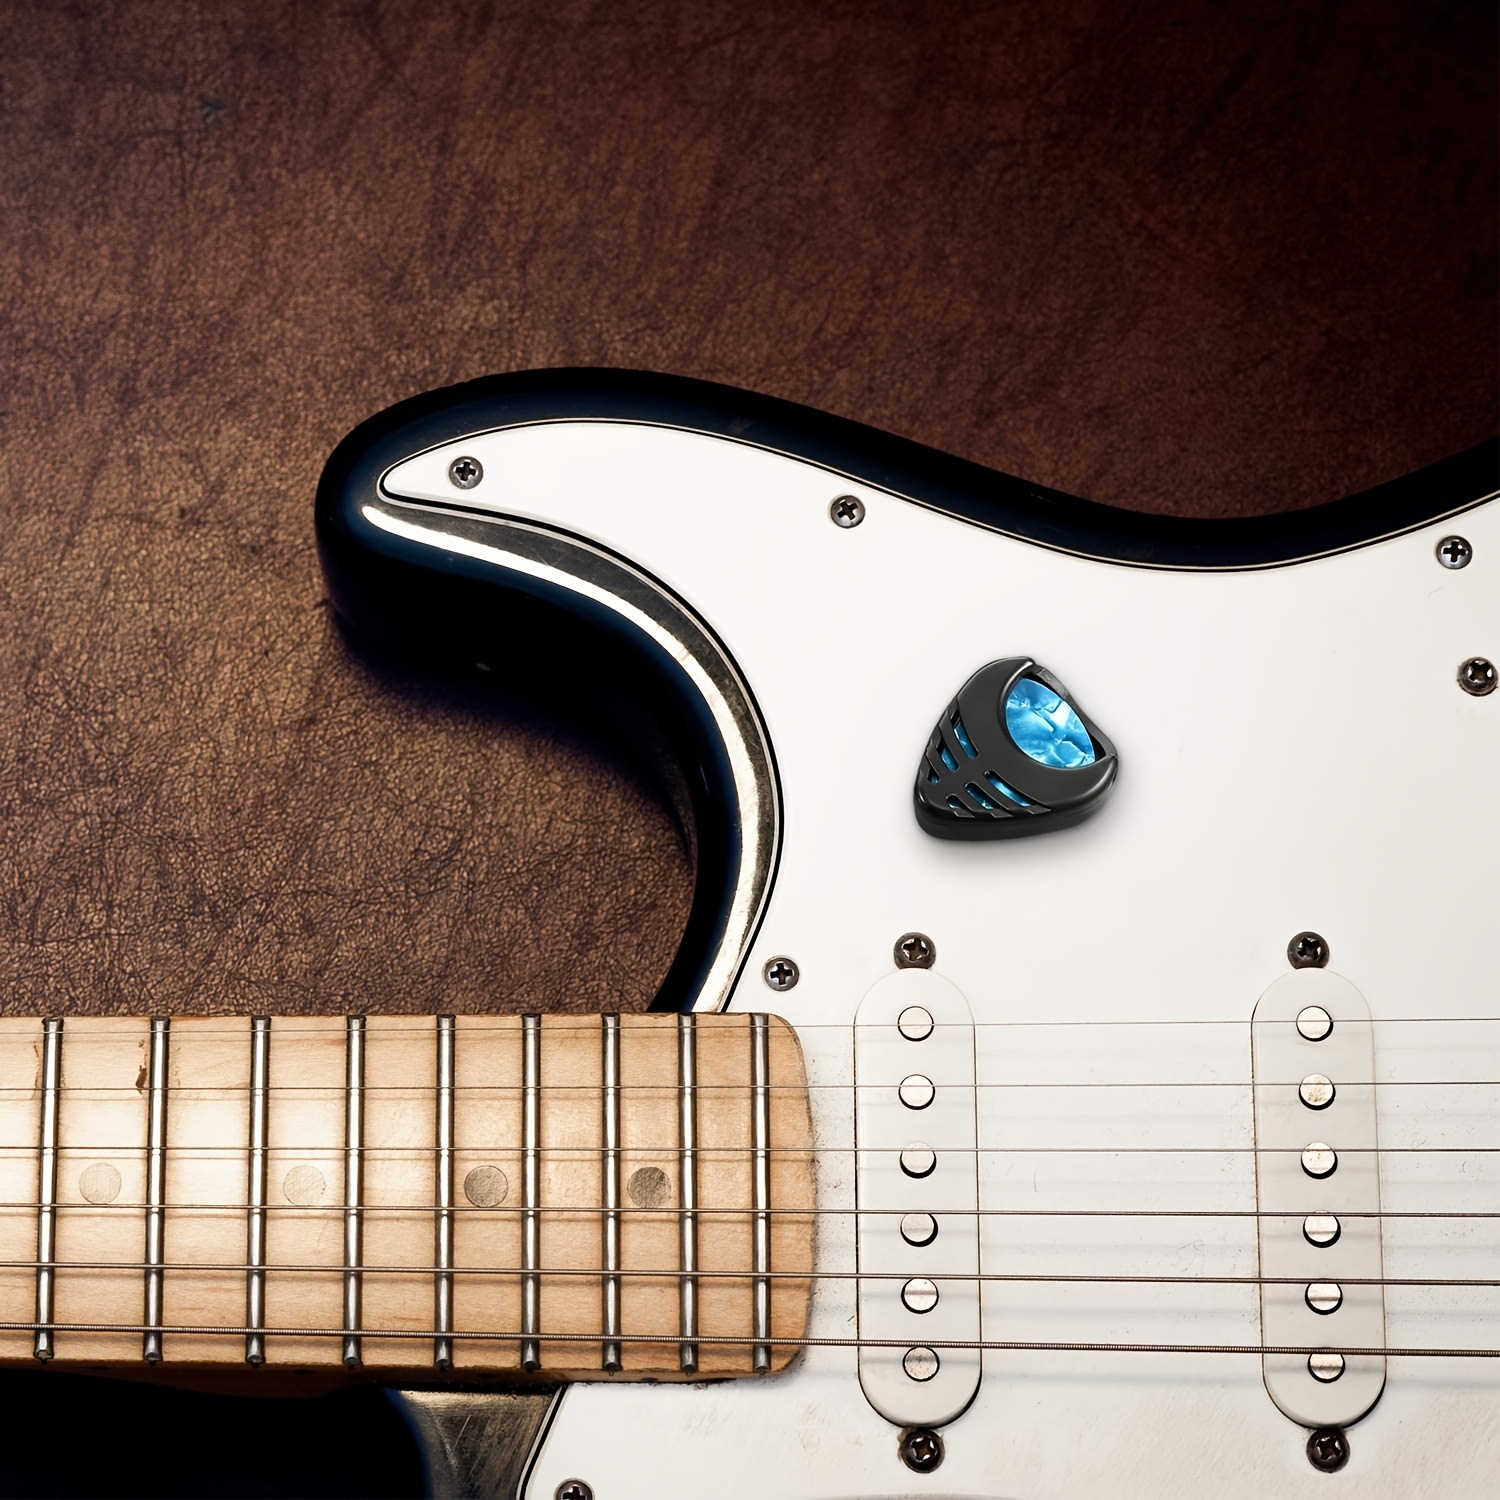 Organize Your Picks with a Latest & Stylish Guitar Pick Holder.